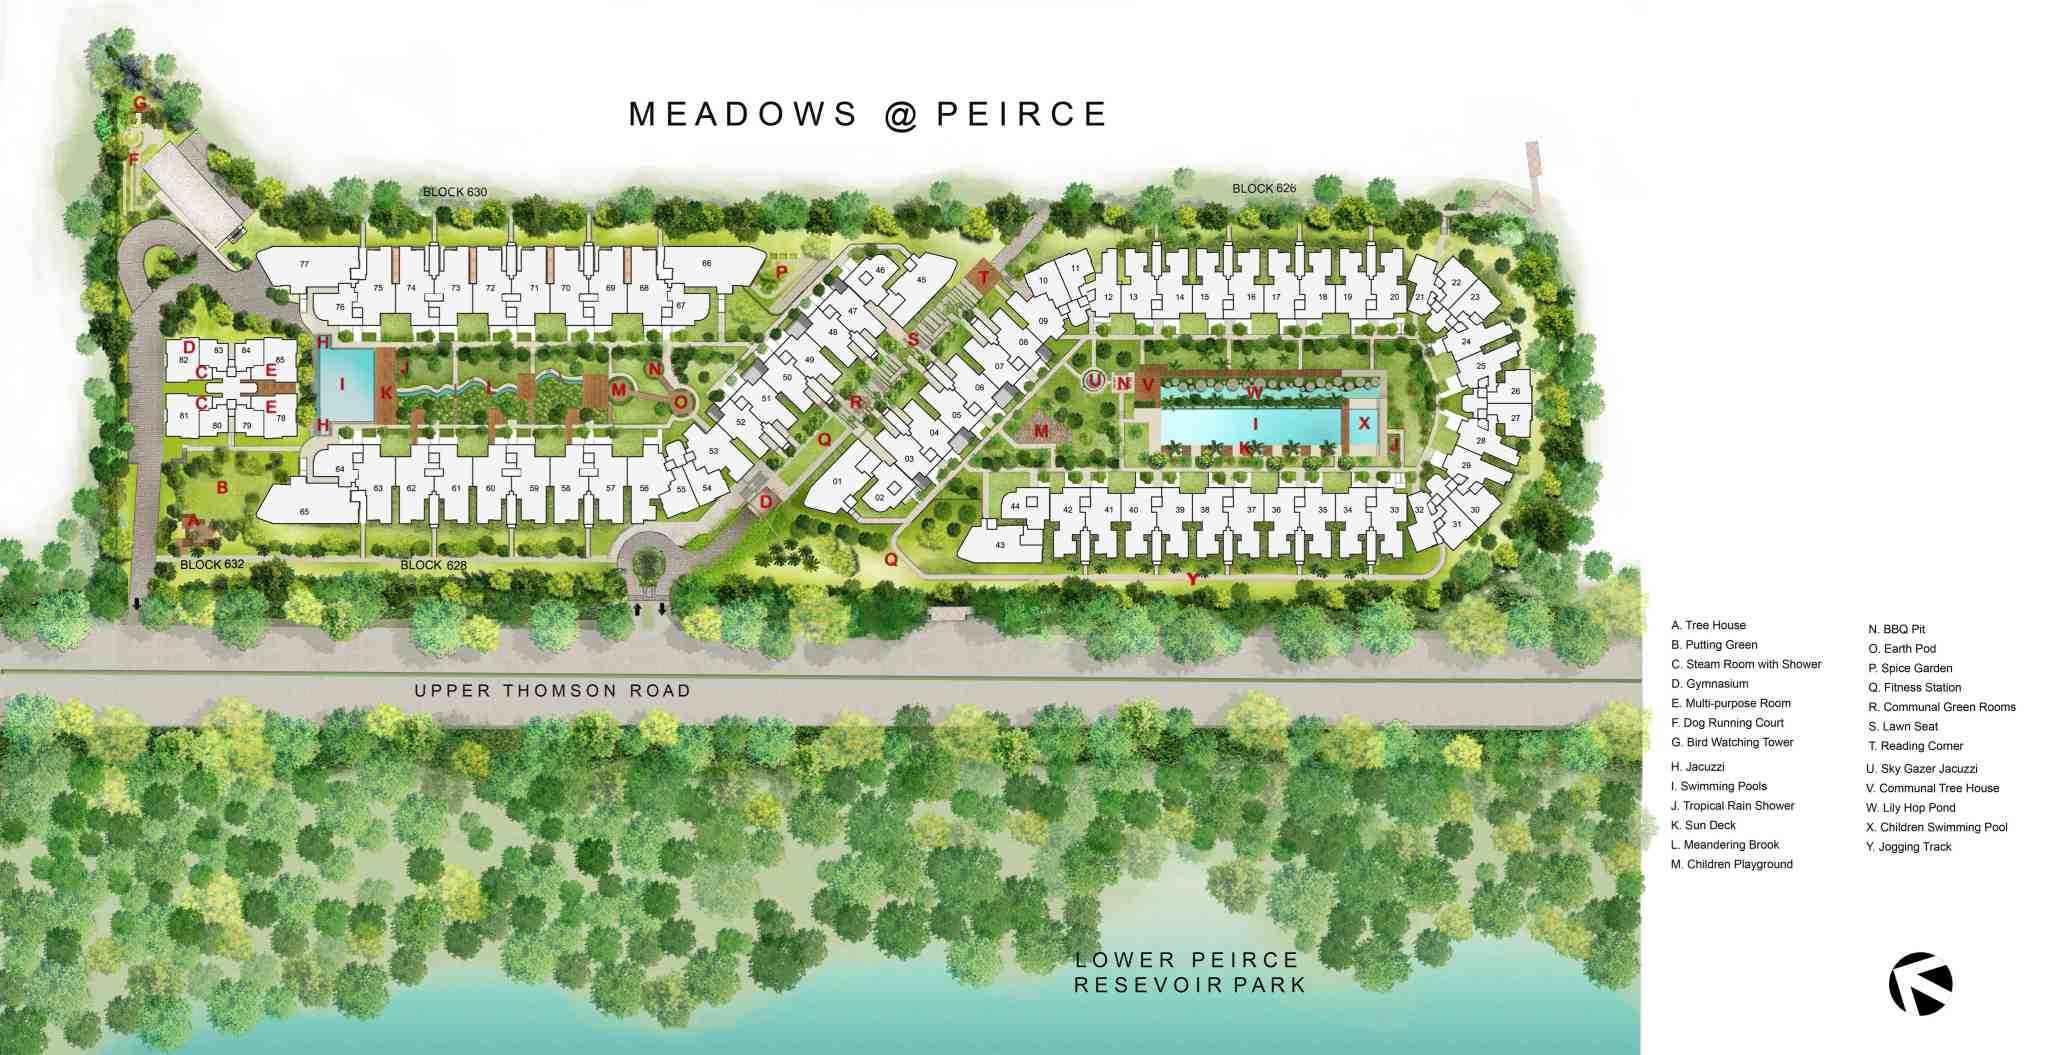 Meadows Peirce Launch Frequently Ask Questions